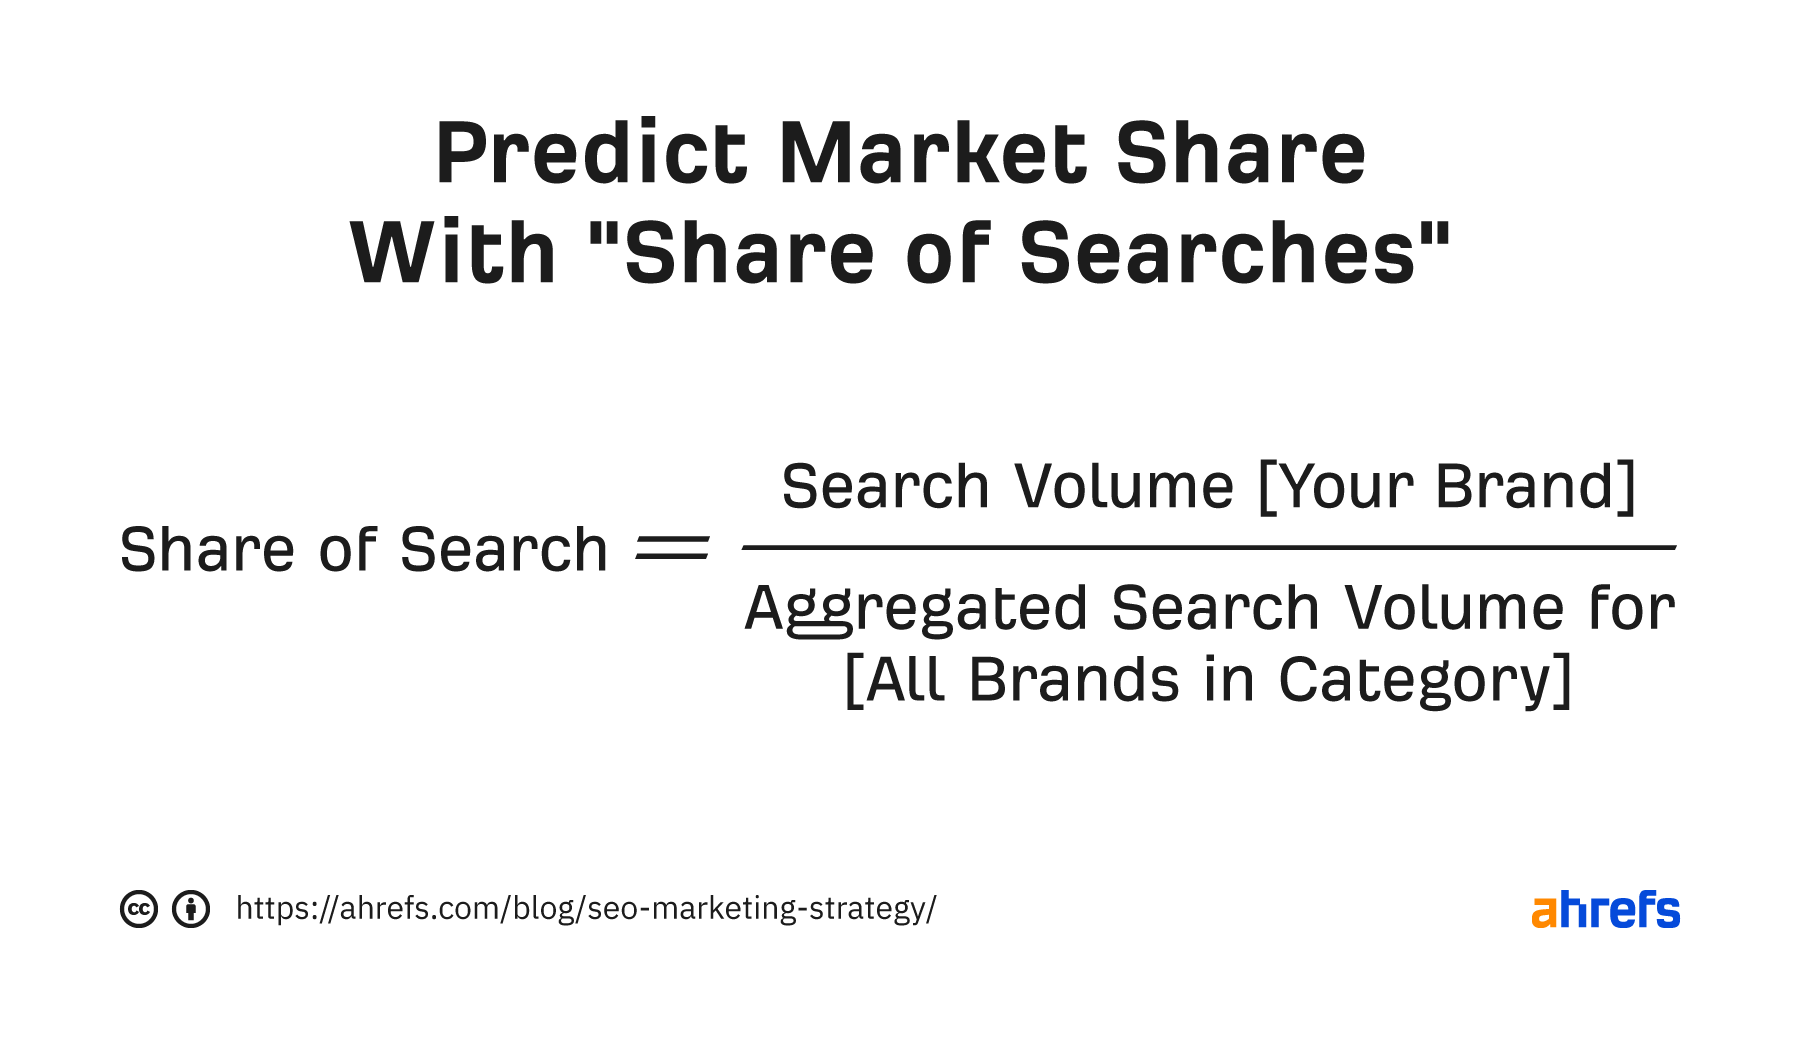 Equation of Les Binet's "share of search"